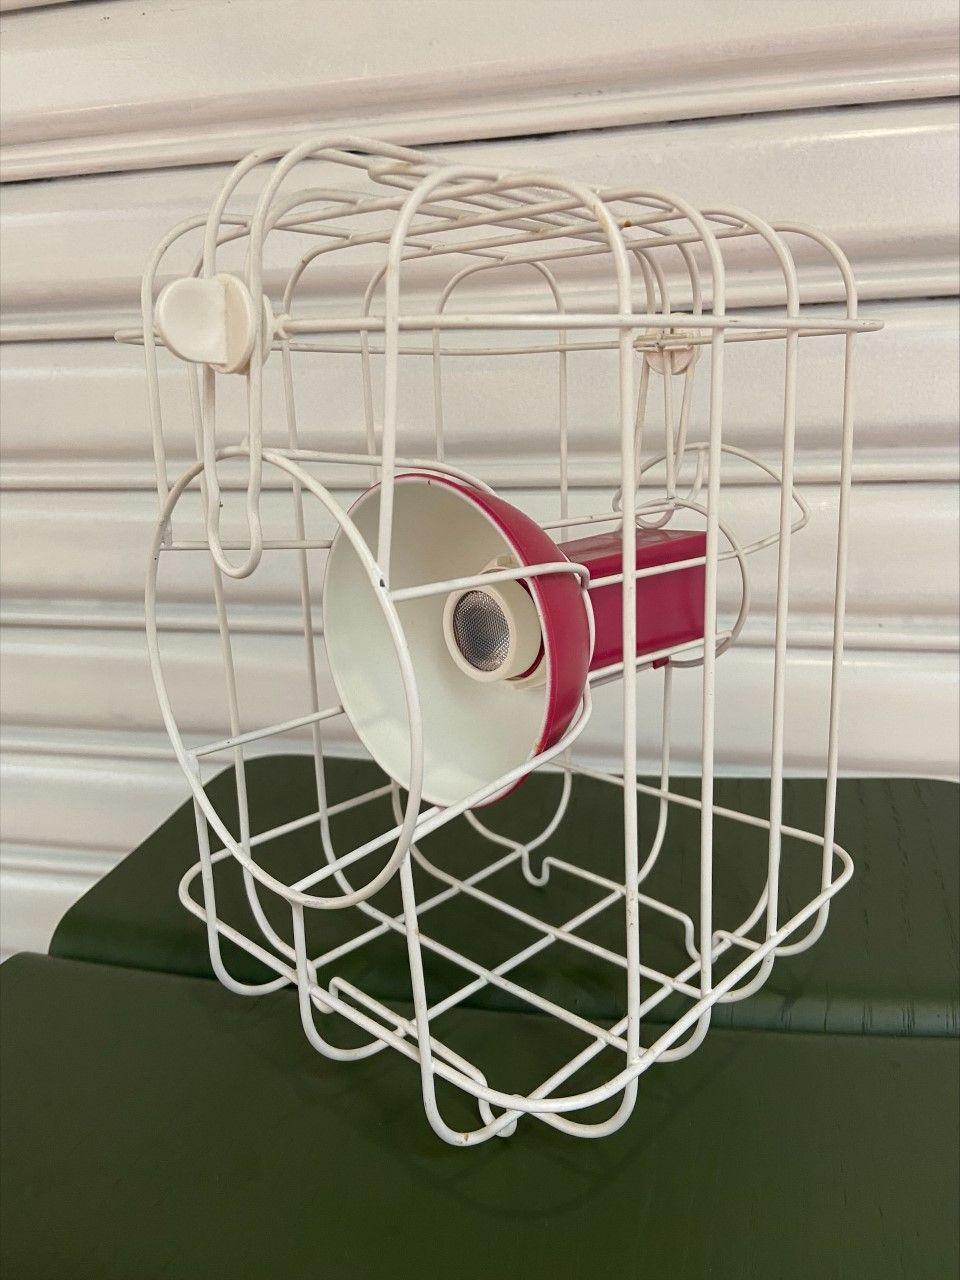 Metal Matali Crasset, Edition Ikea Ps Lamp Model Caged, 2017 For Sale